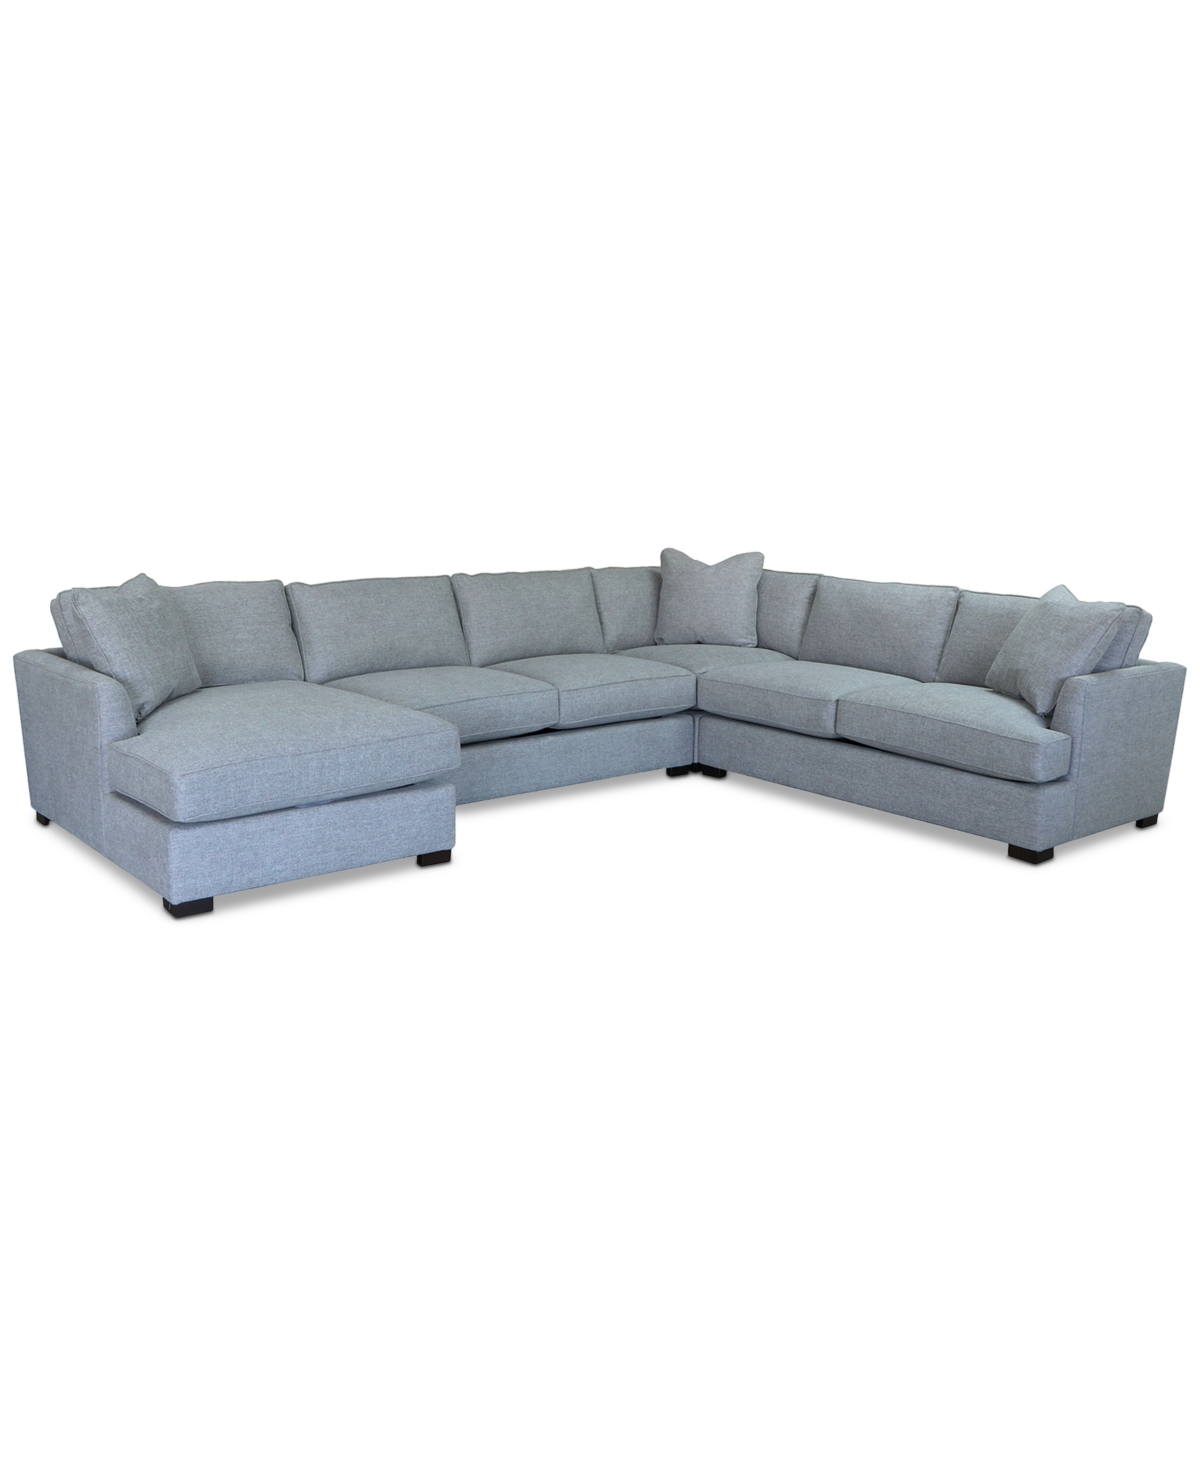 Furniture Nightford 148" 4-pc. Fabric Chaise Sectional, Created For Macy's In Granite